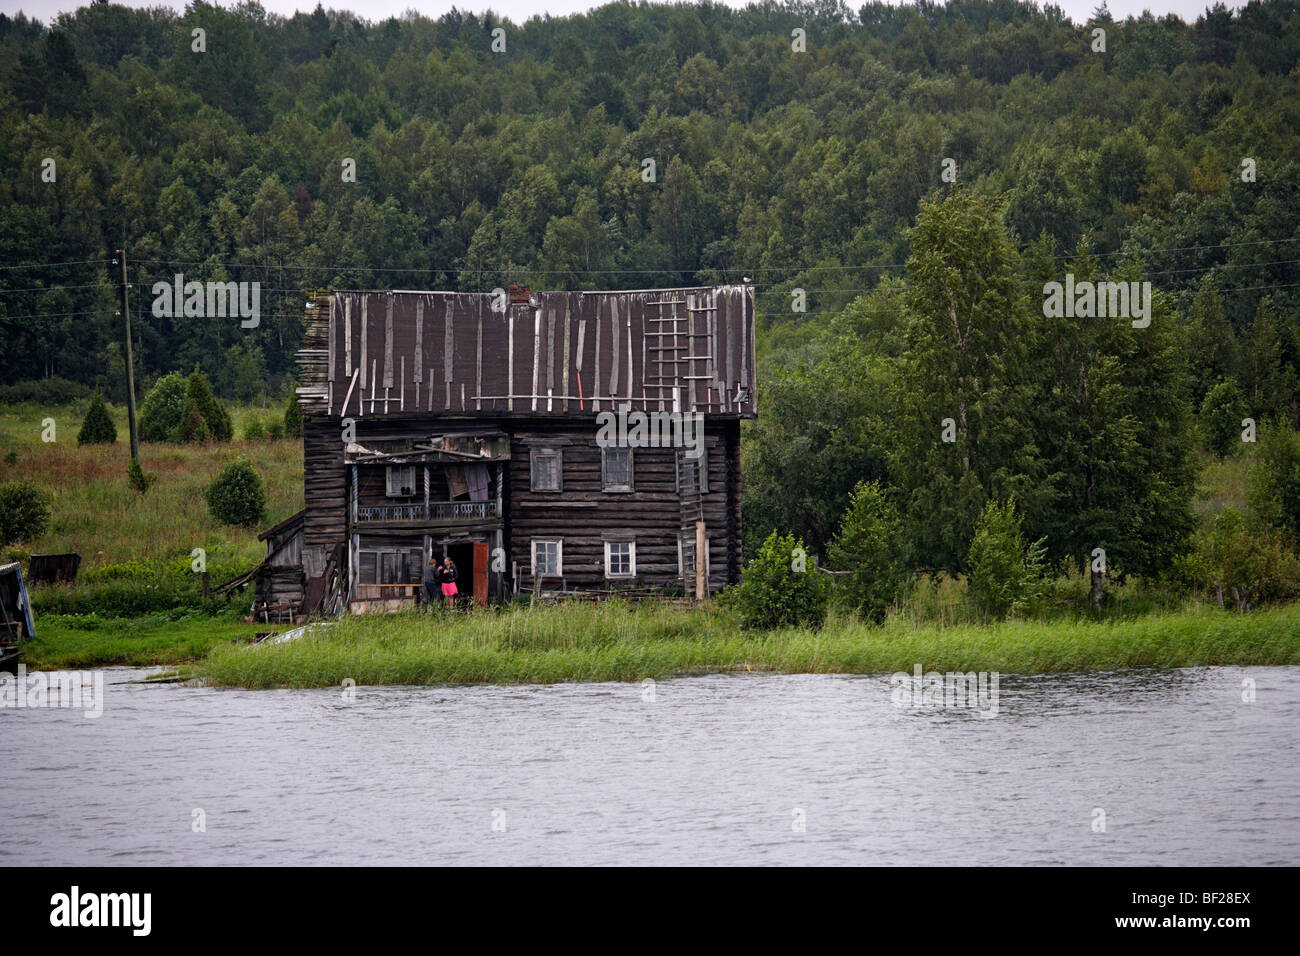 Damaged wooden house, Lake Onega, the second biggest lake in Europe, Russia Stock Photo